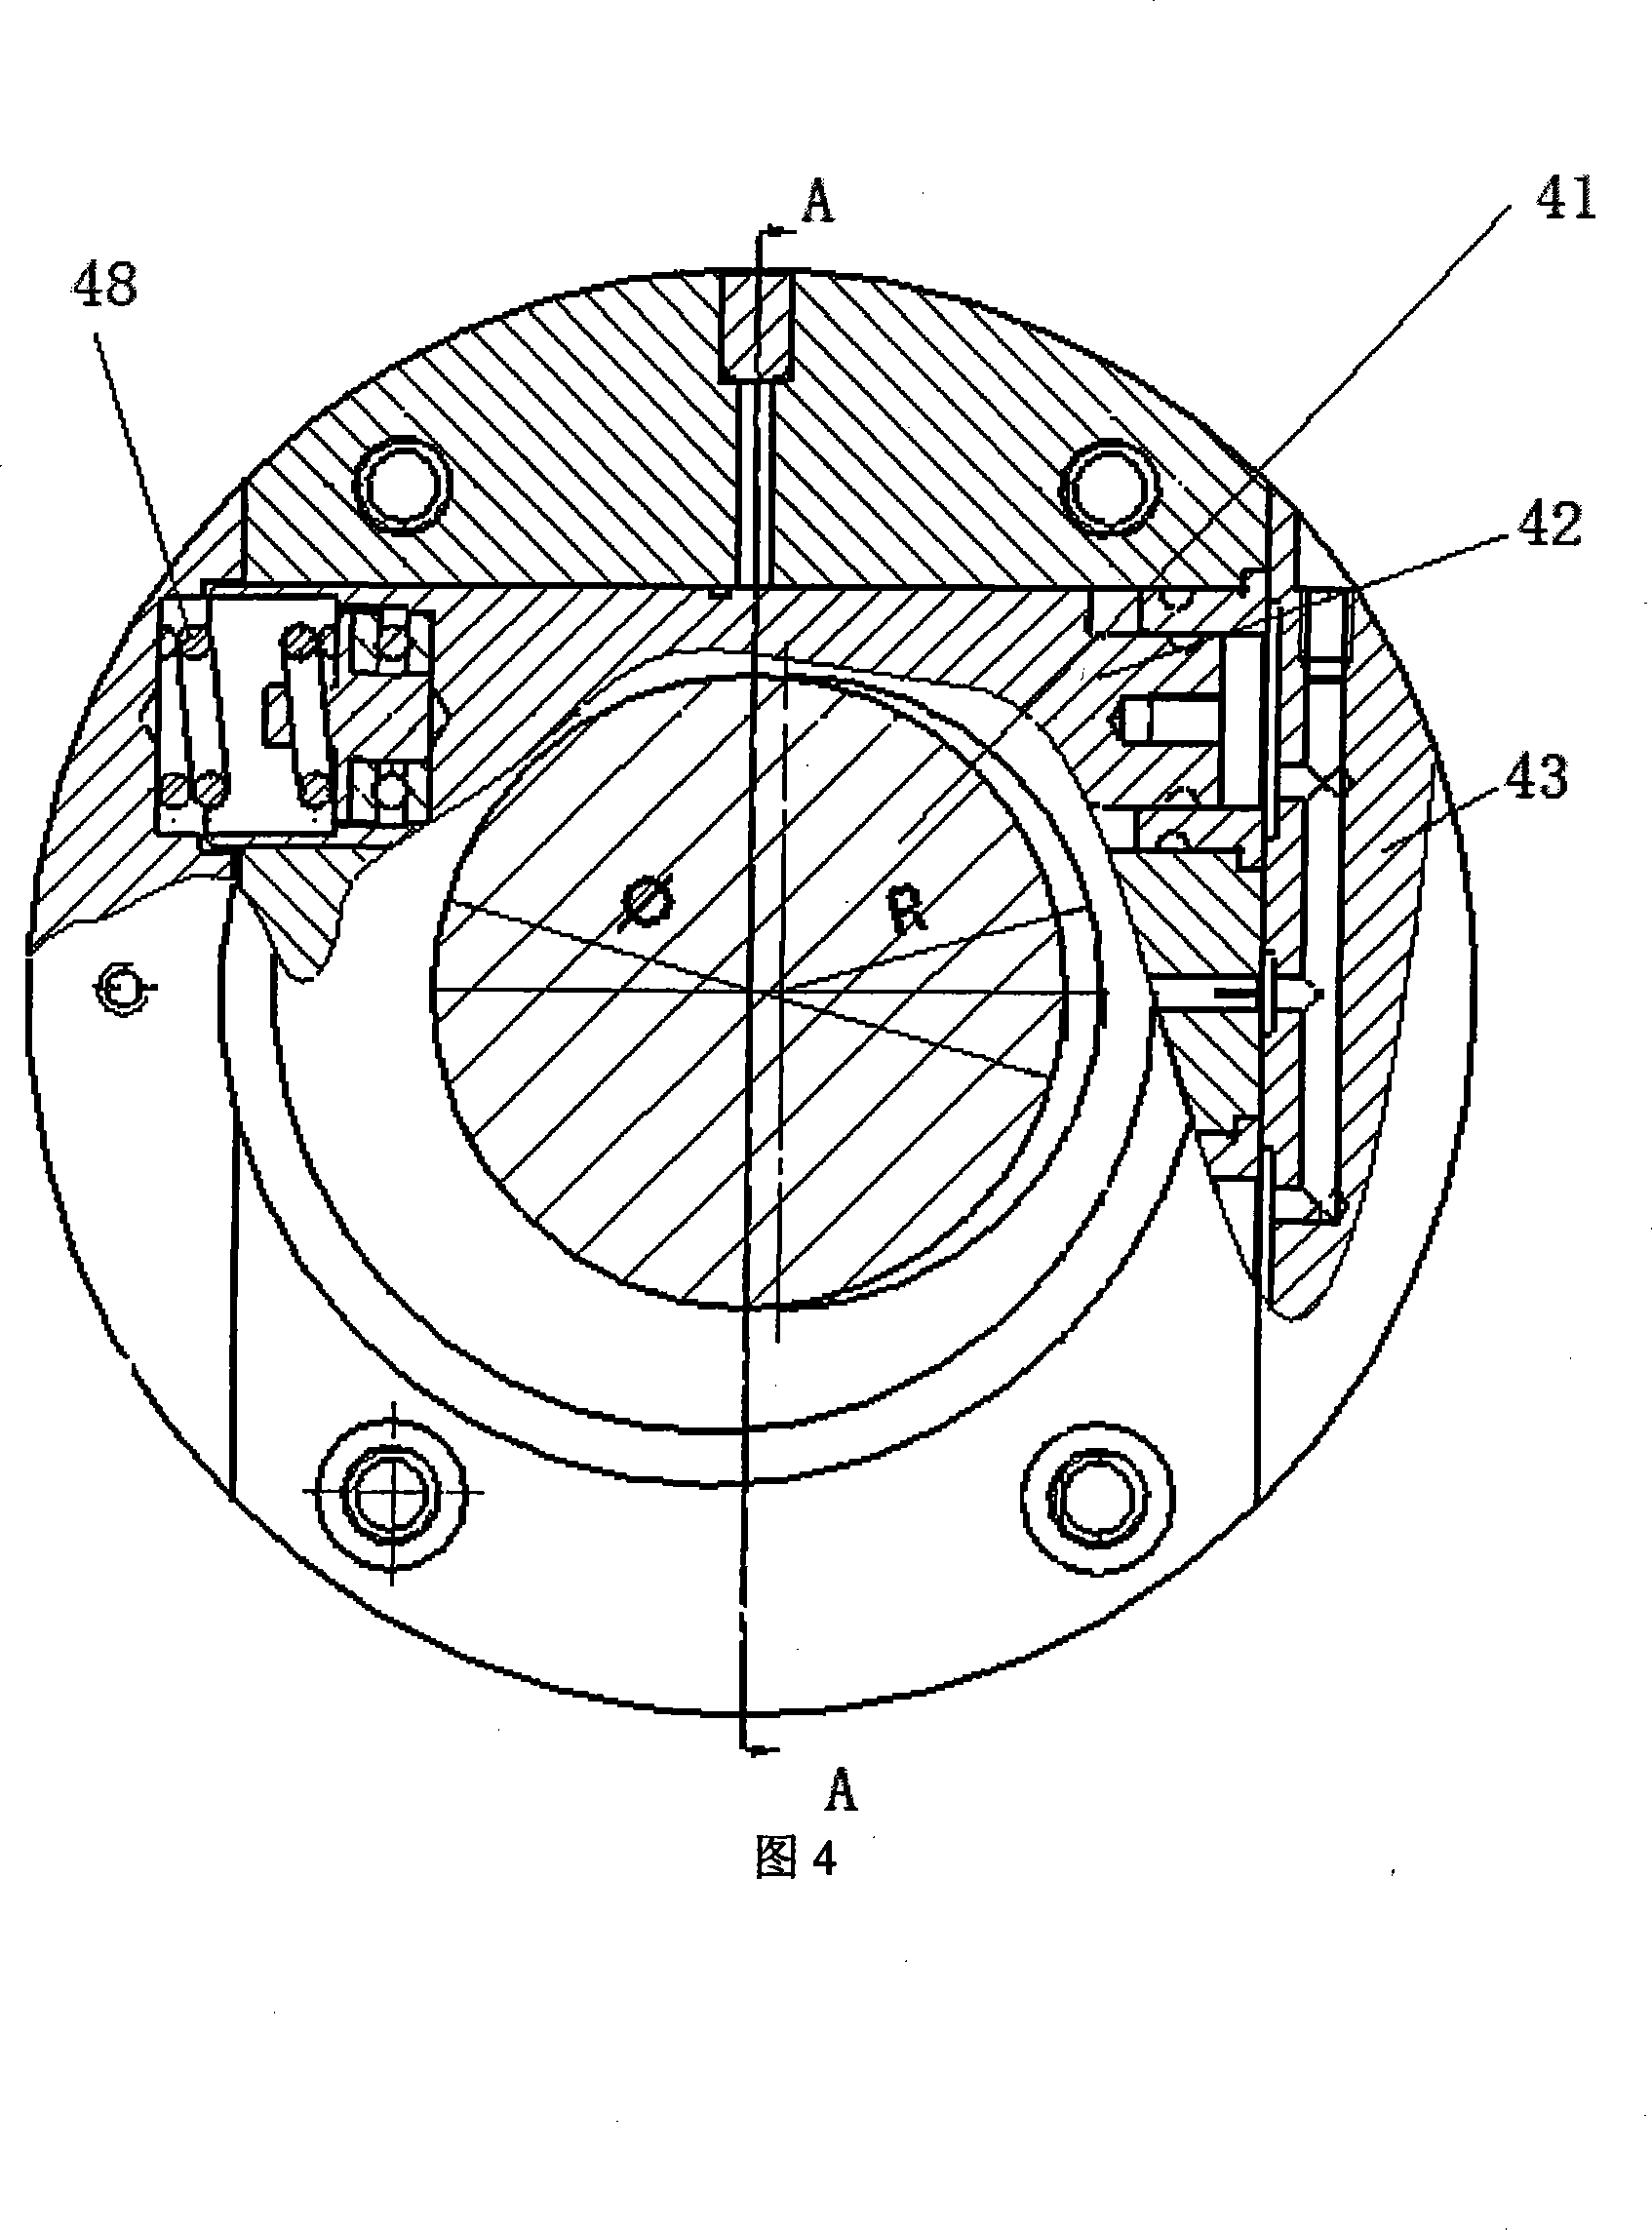 Non-conventional type hole combined boring mill